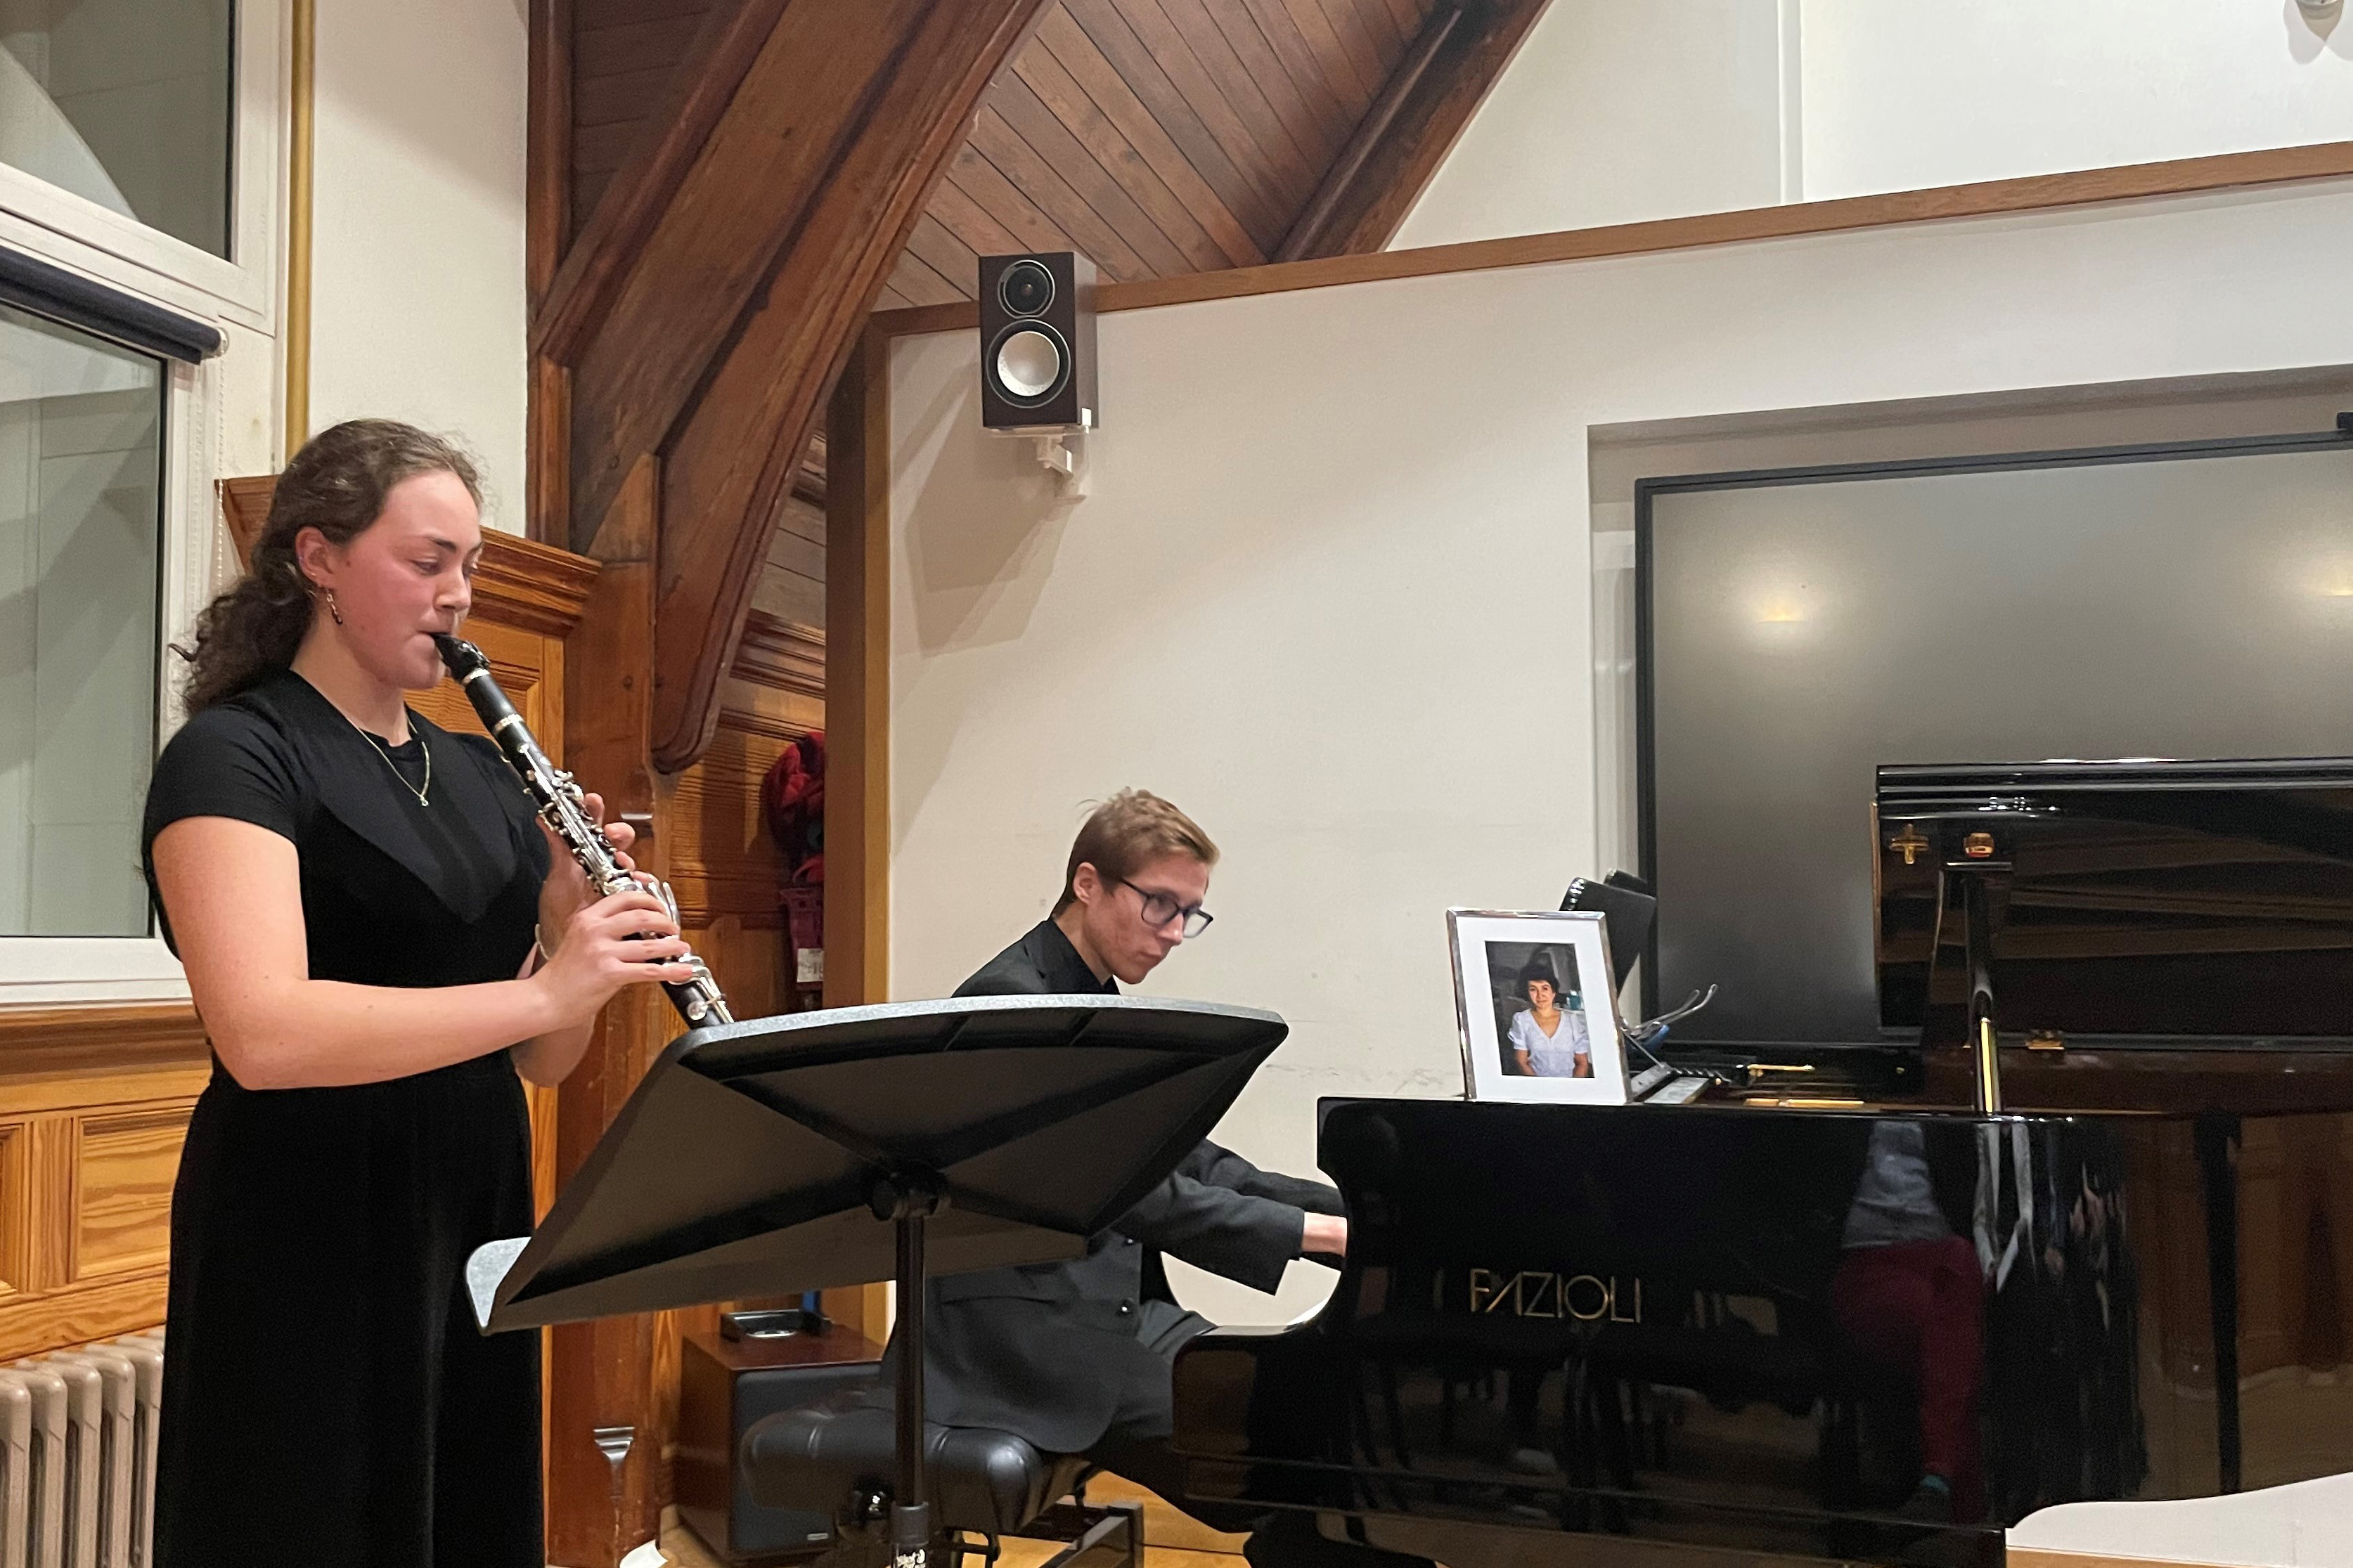 A woman wearing a dark black dress, playing the clarinet, with a man, wearing smart black attire, playing the piano in a wood panelled room.